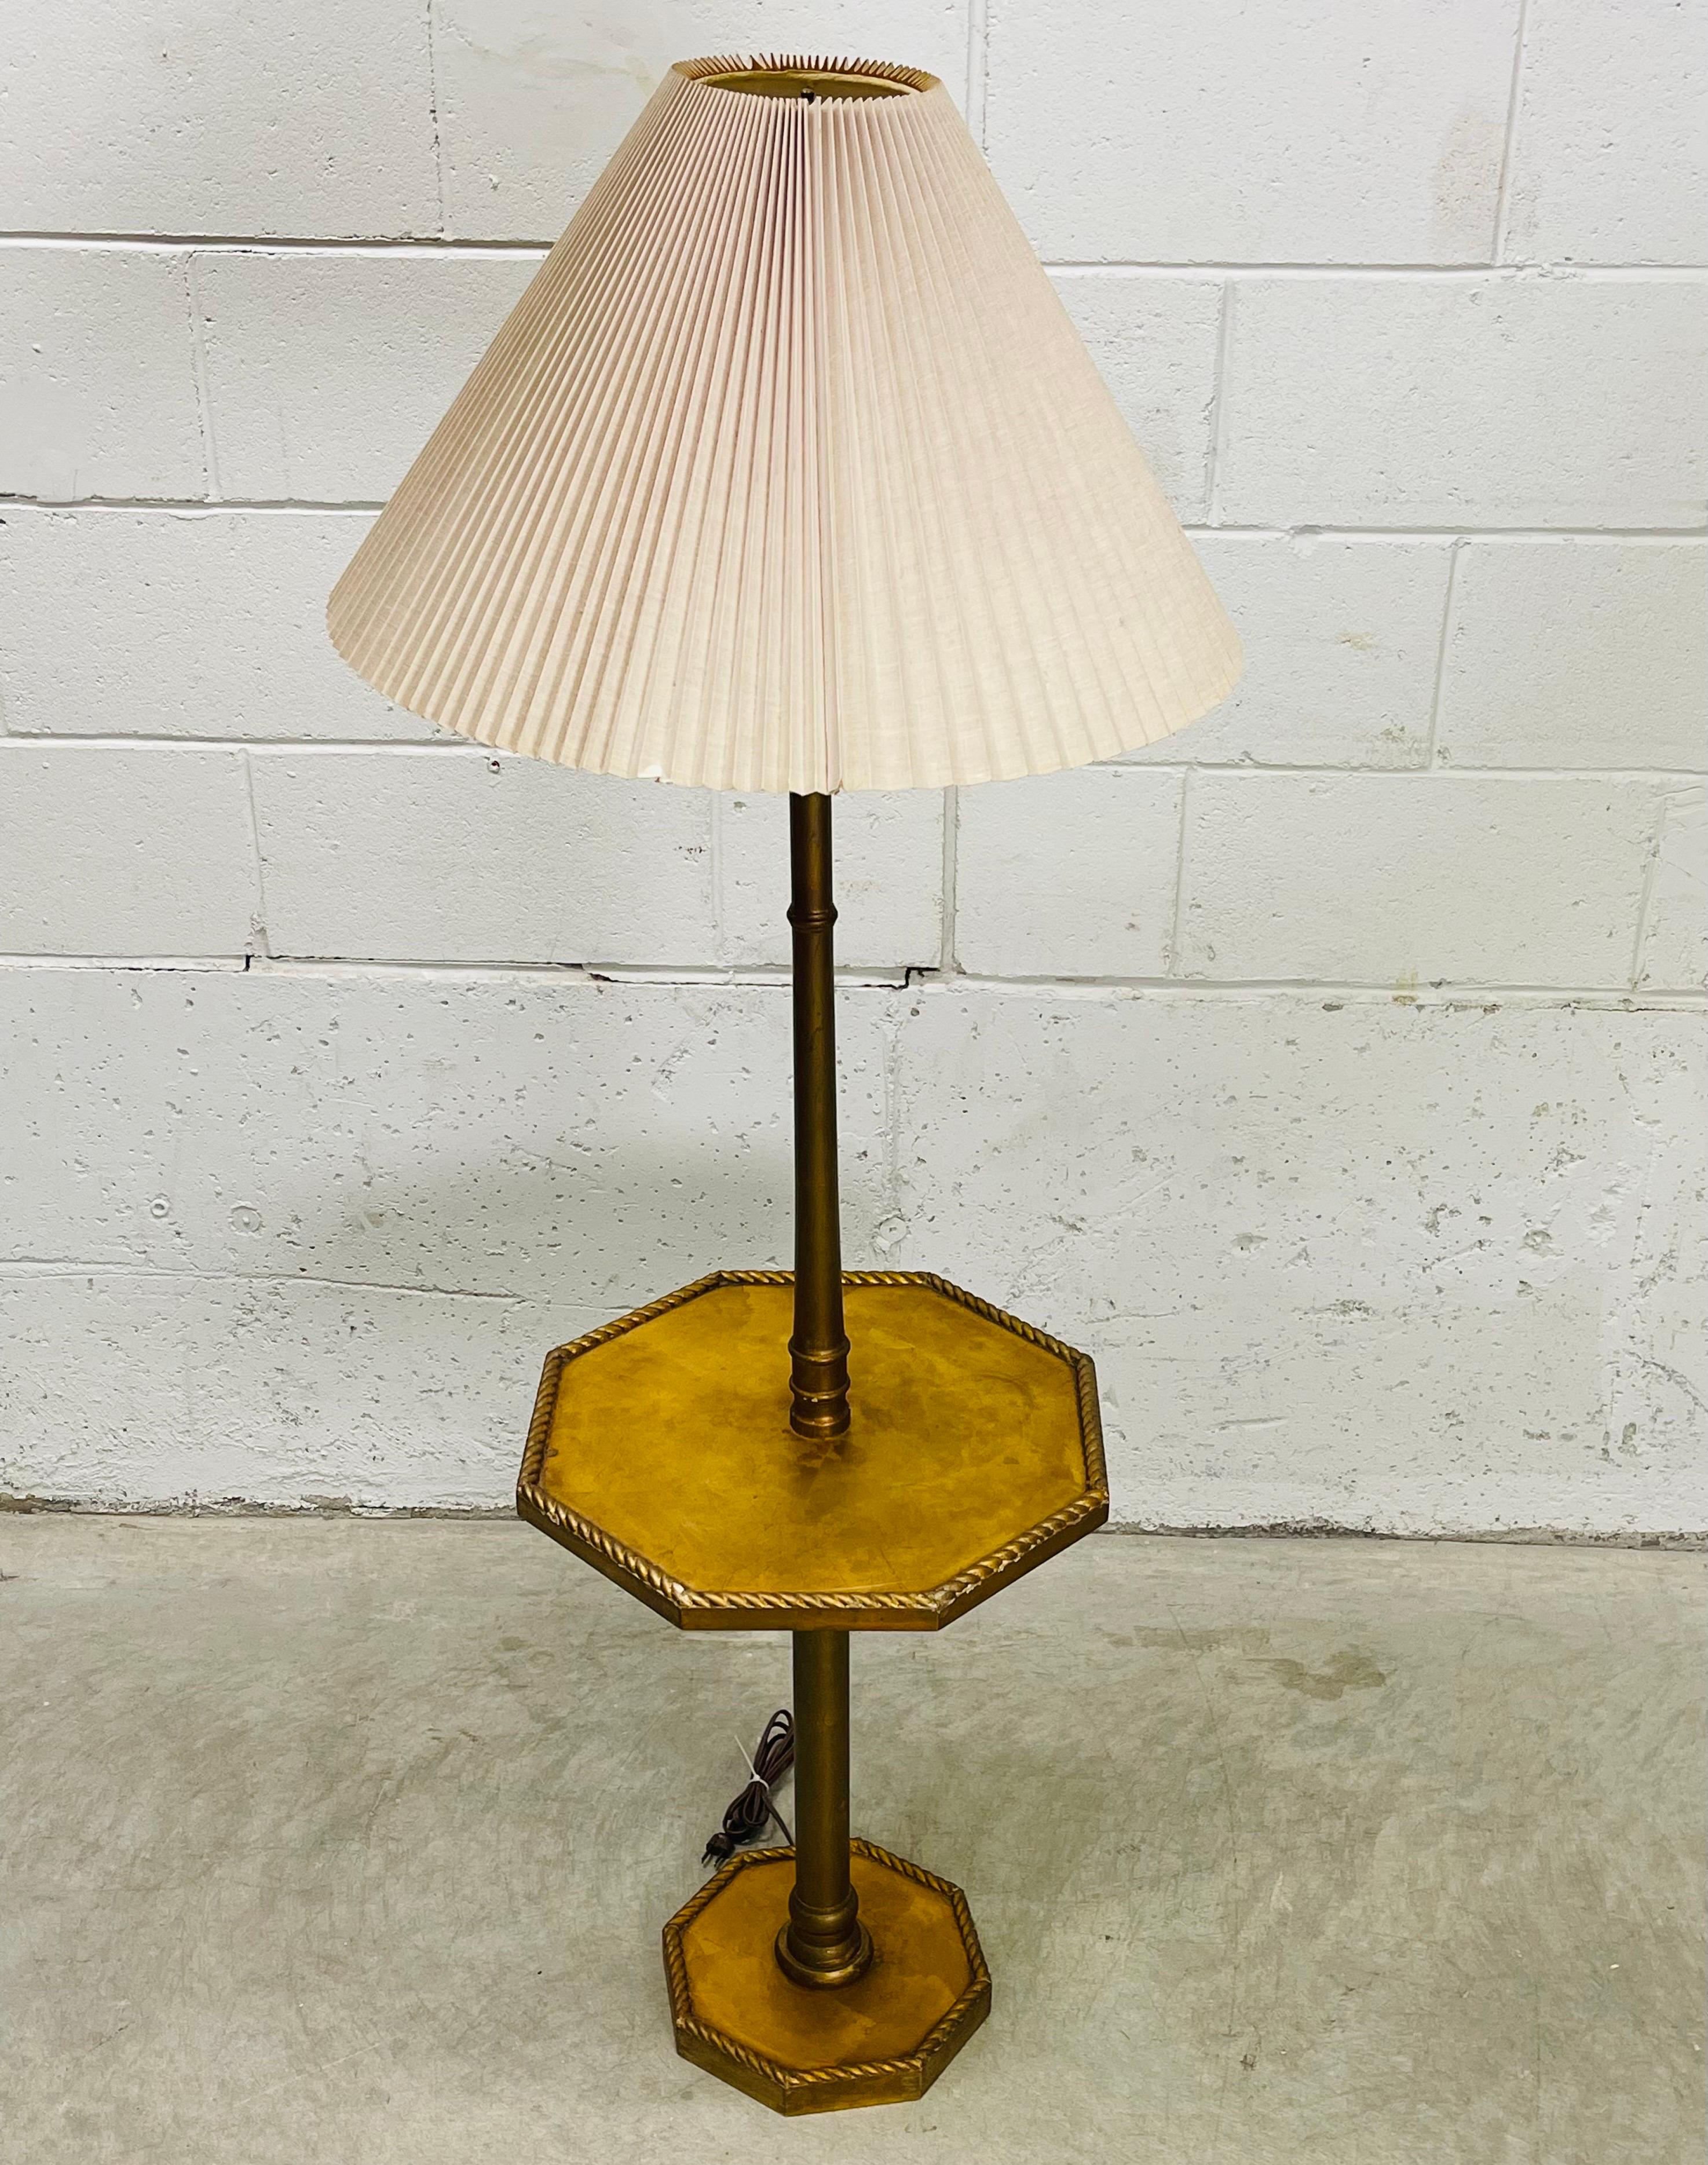 Vintage 1960s gold wood floor lamp with 6 sided table and original shade. The lamp also has a rope accent around the table and the base. Wired for the US and in working condition. Uses a standard 100W bulb. Shade, 21”Diameter x 14” H. Socket, 46” H.